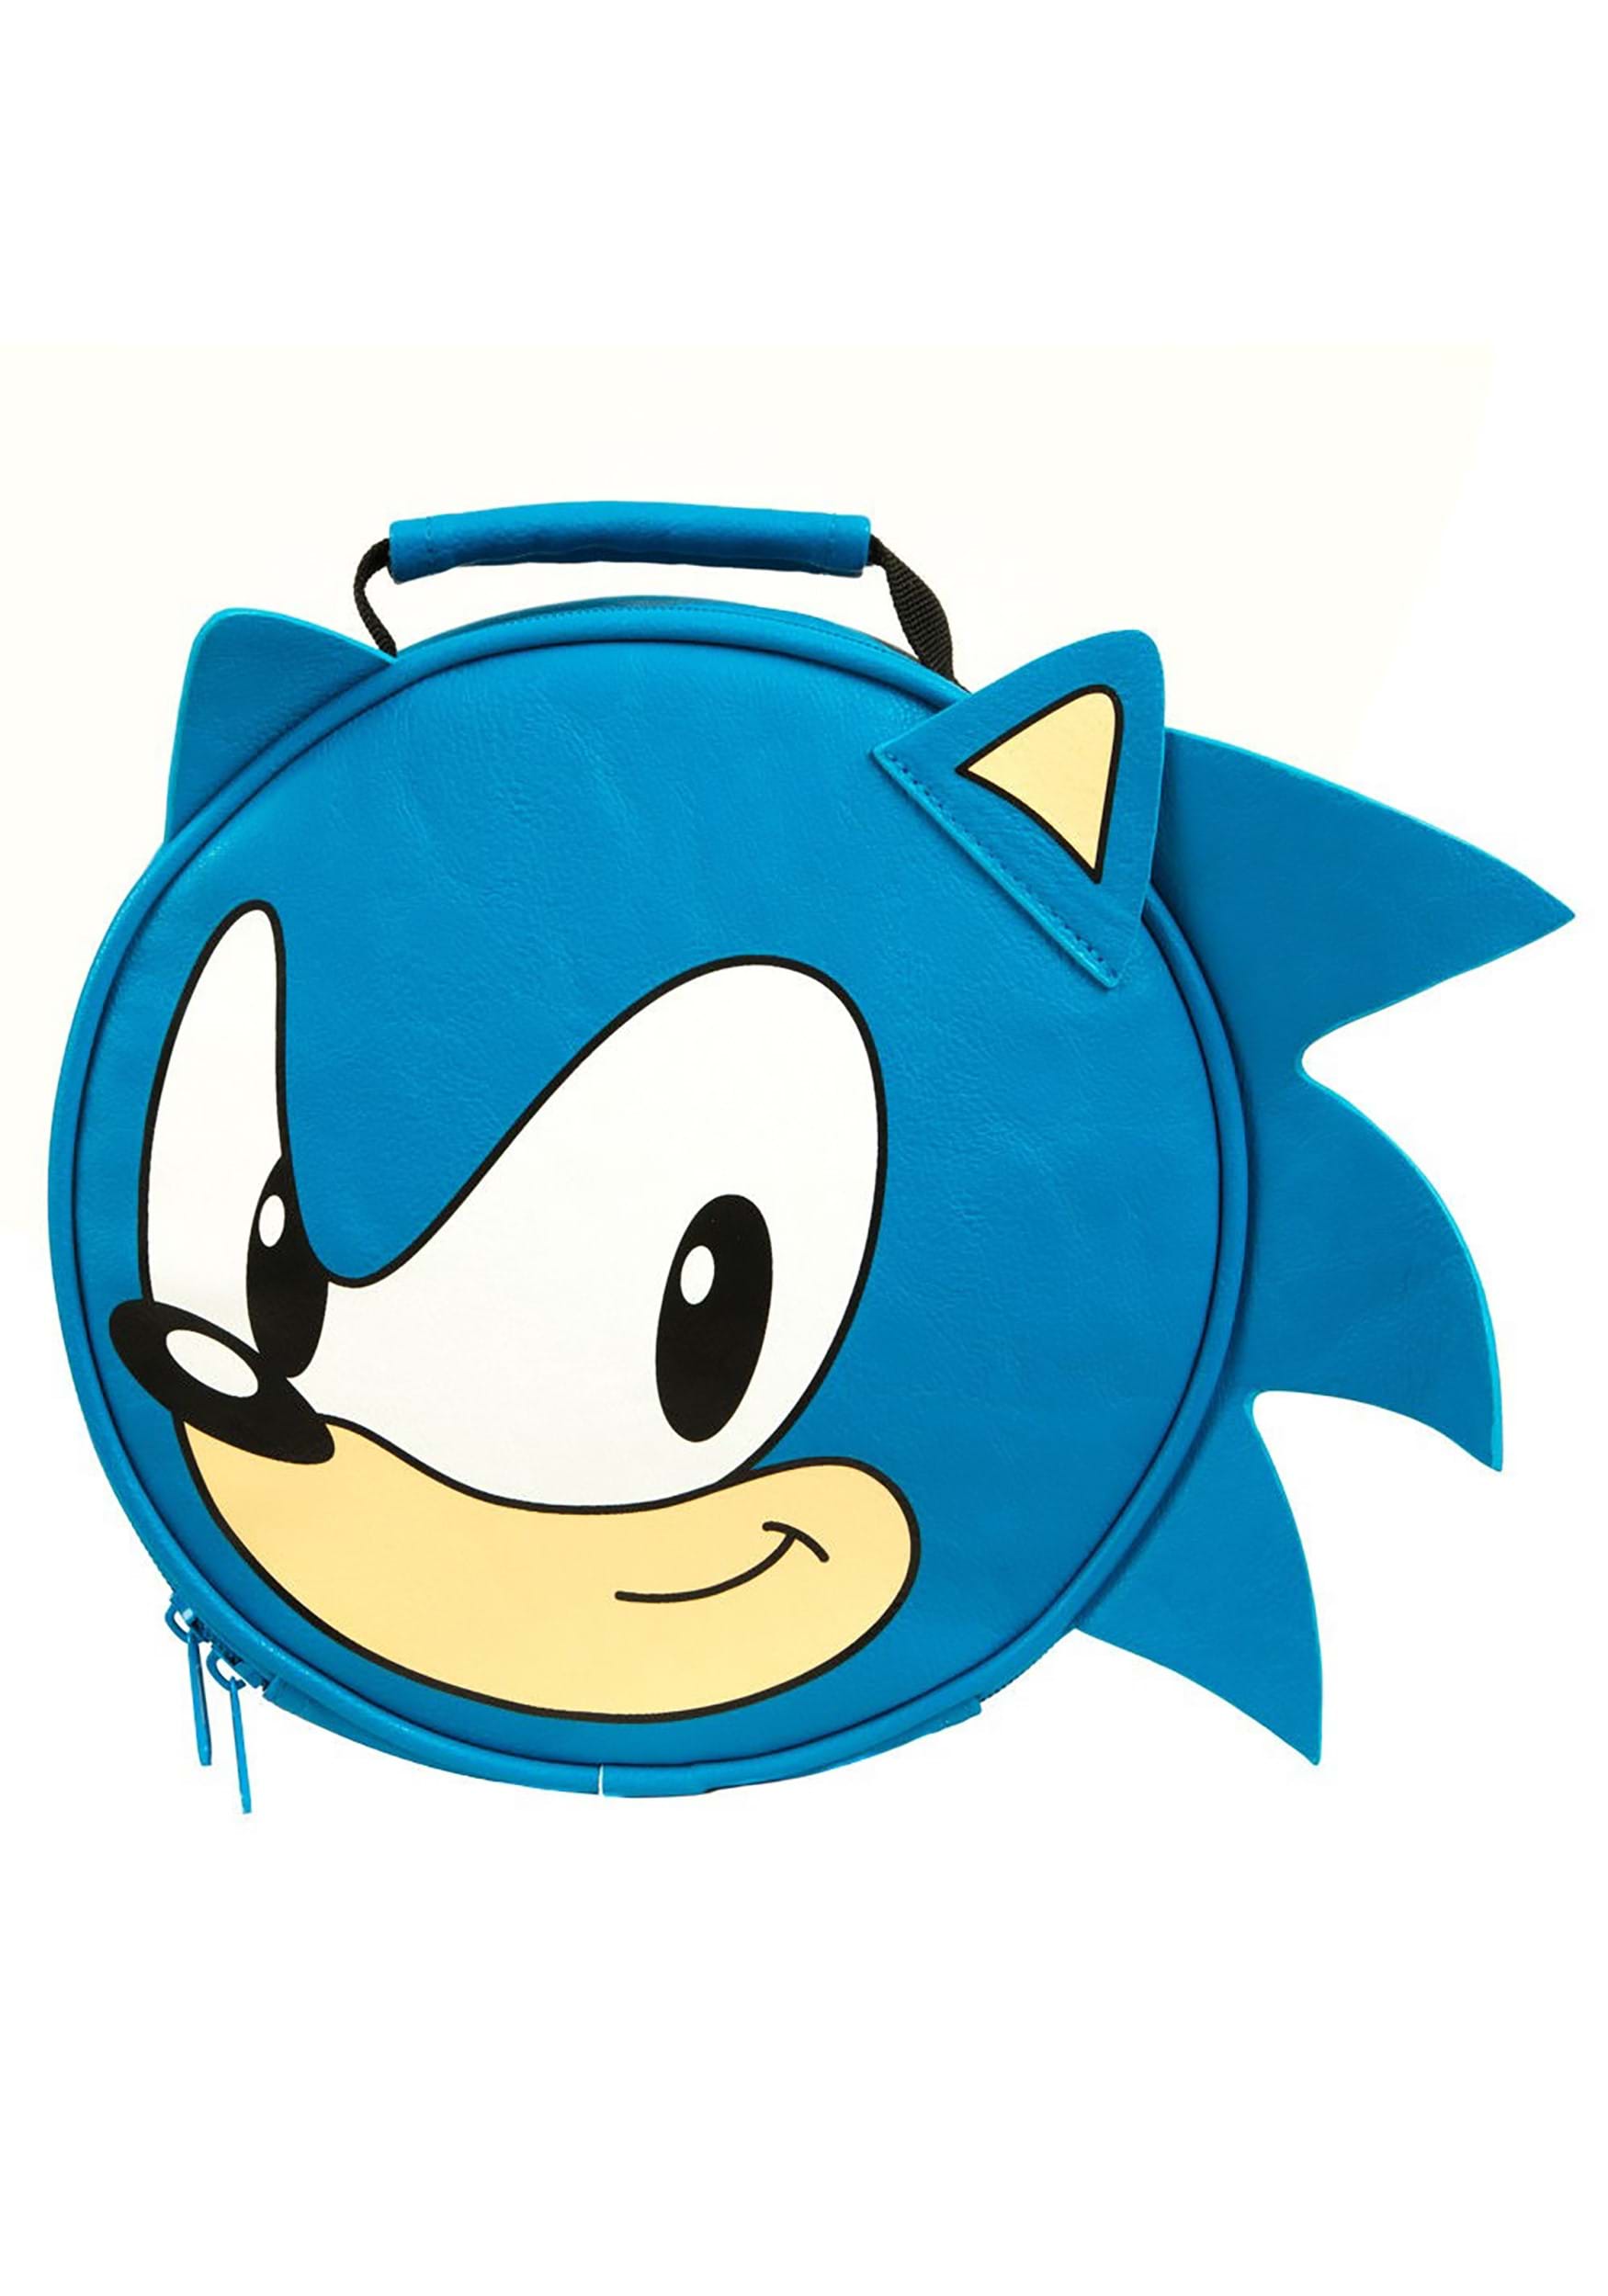 Accessories, Brand New Sonic Lunch Box